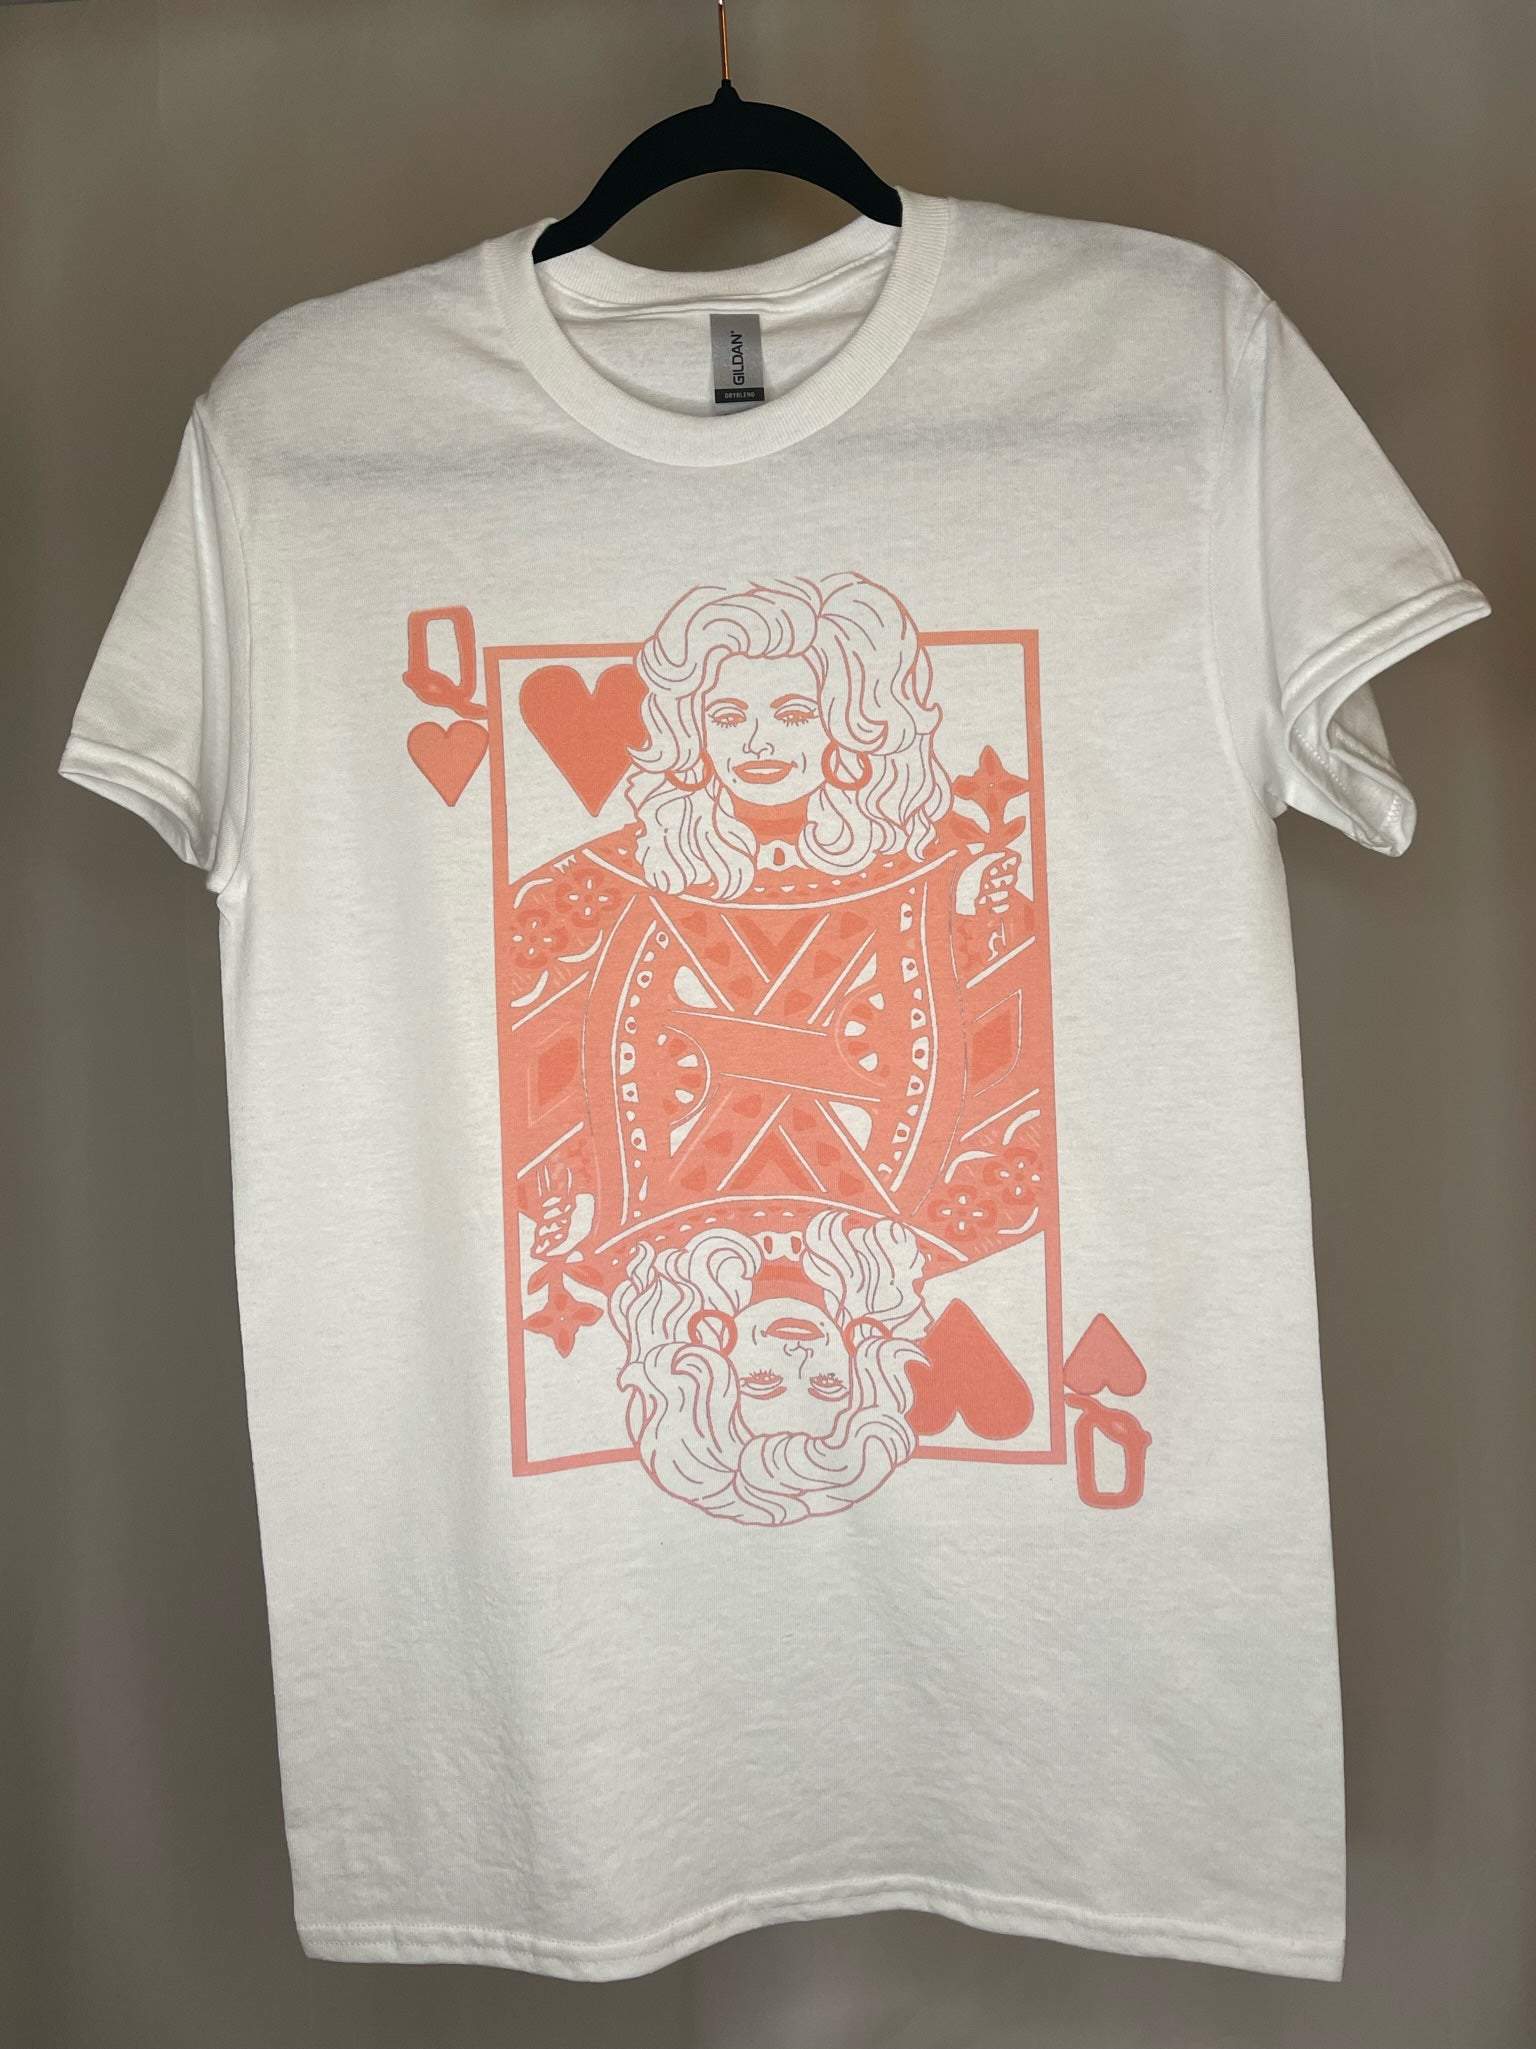 White t-shirt with queen of hearts playing card graphic in pink with Dolly Parton as the queen